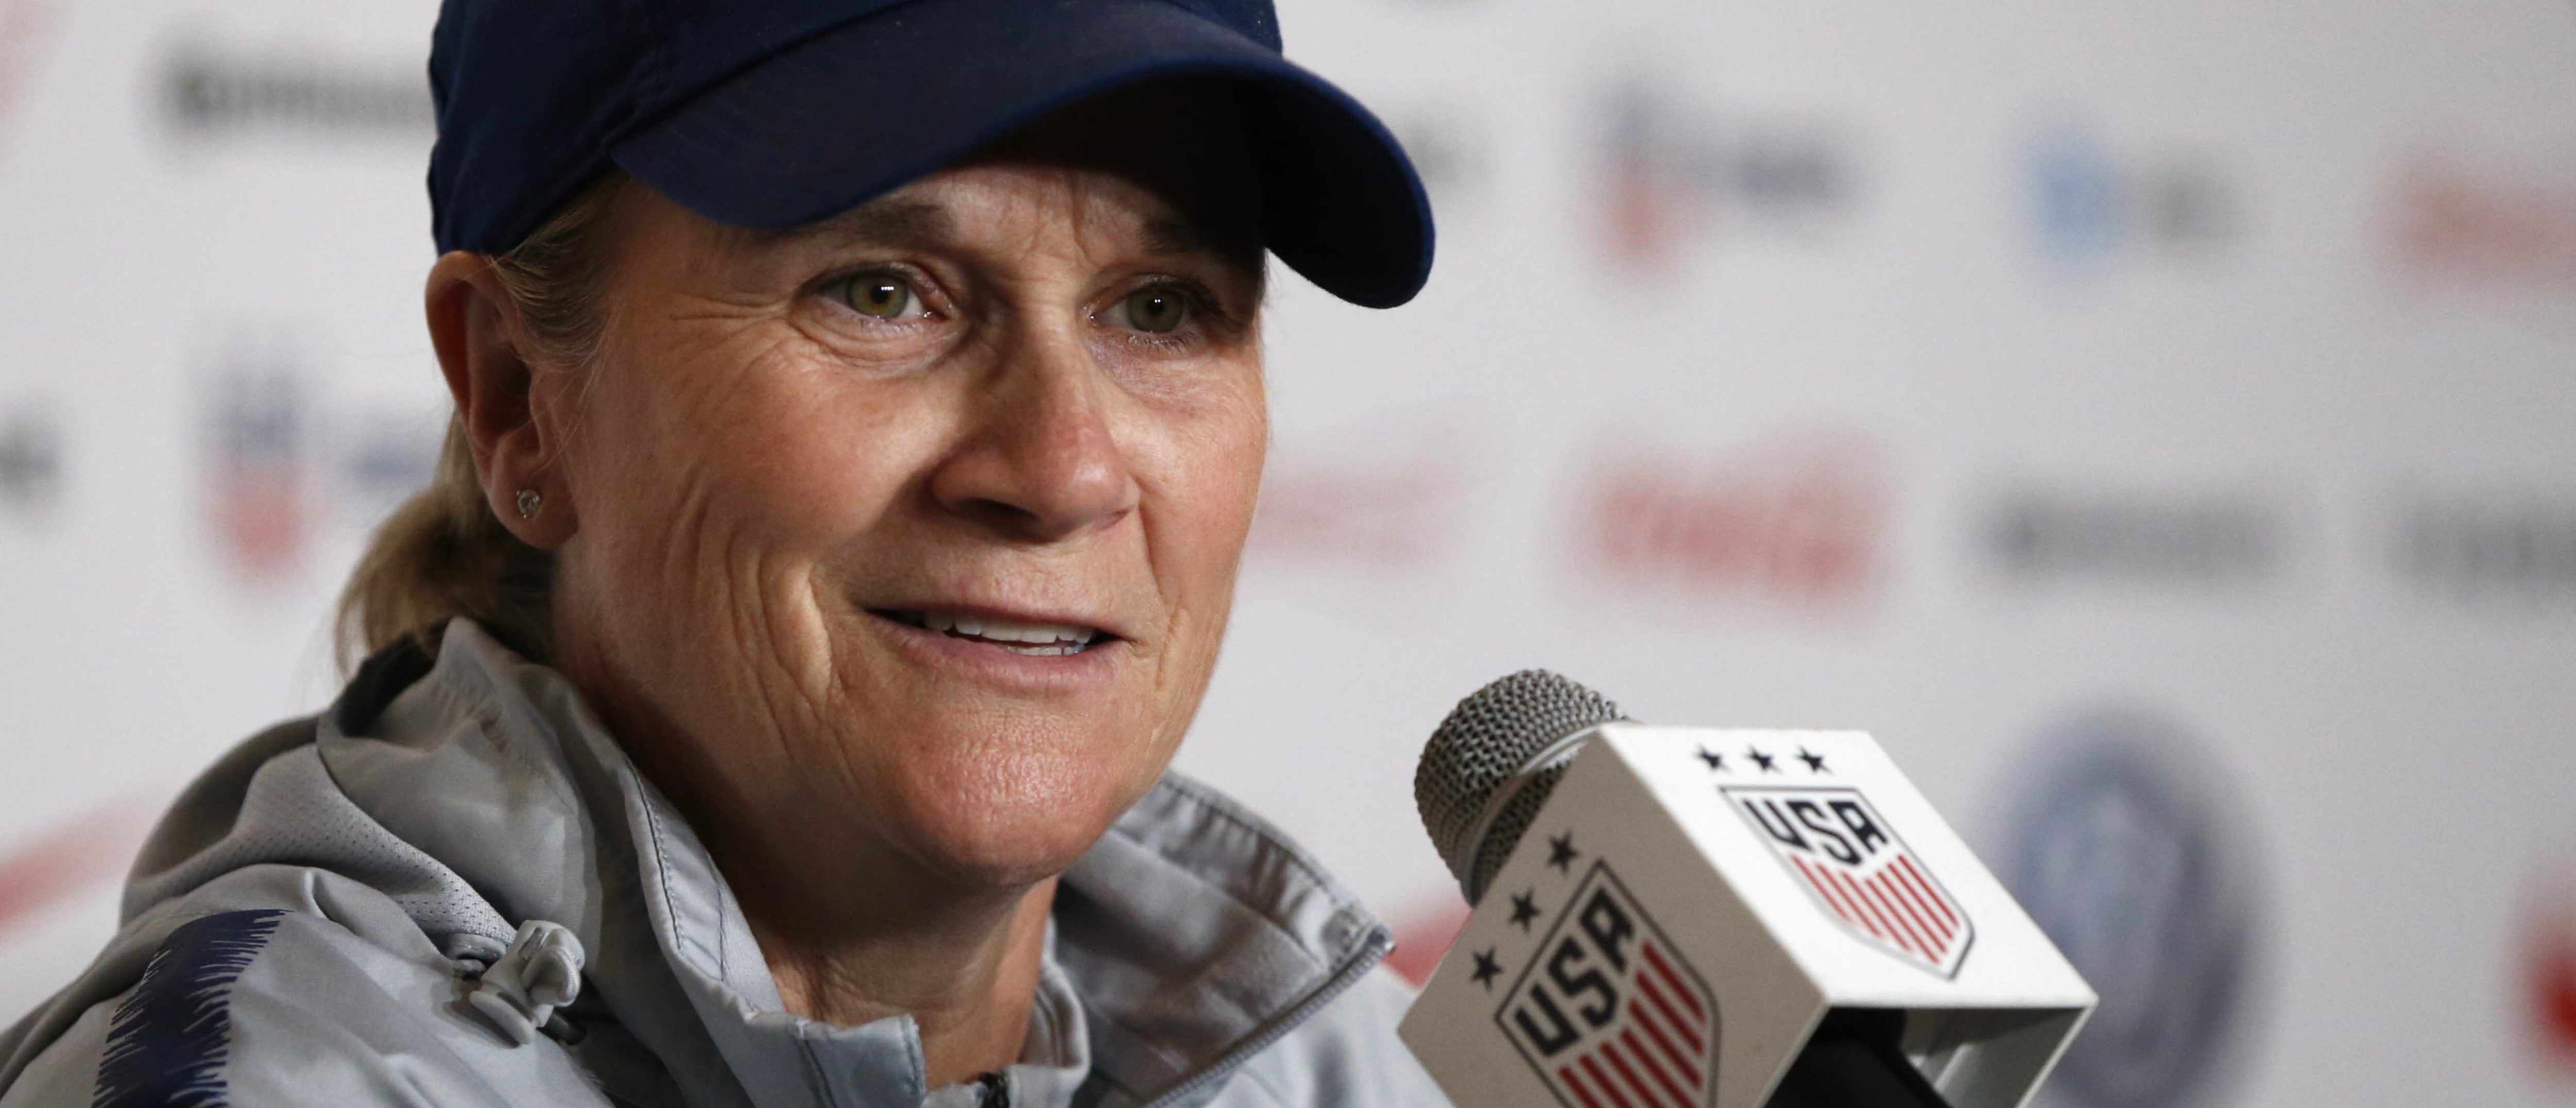 Uswnt Head Coach Jill Ellis Decides To Step Down The Daily Caller 